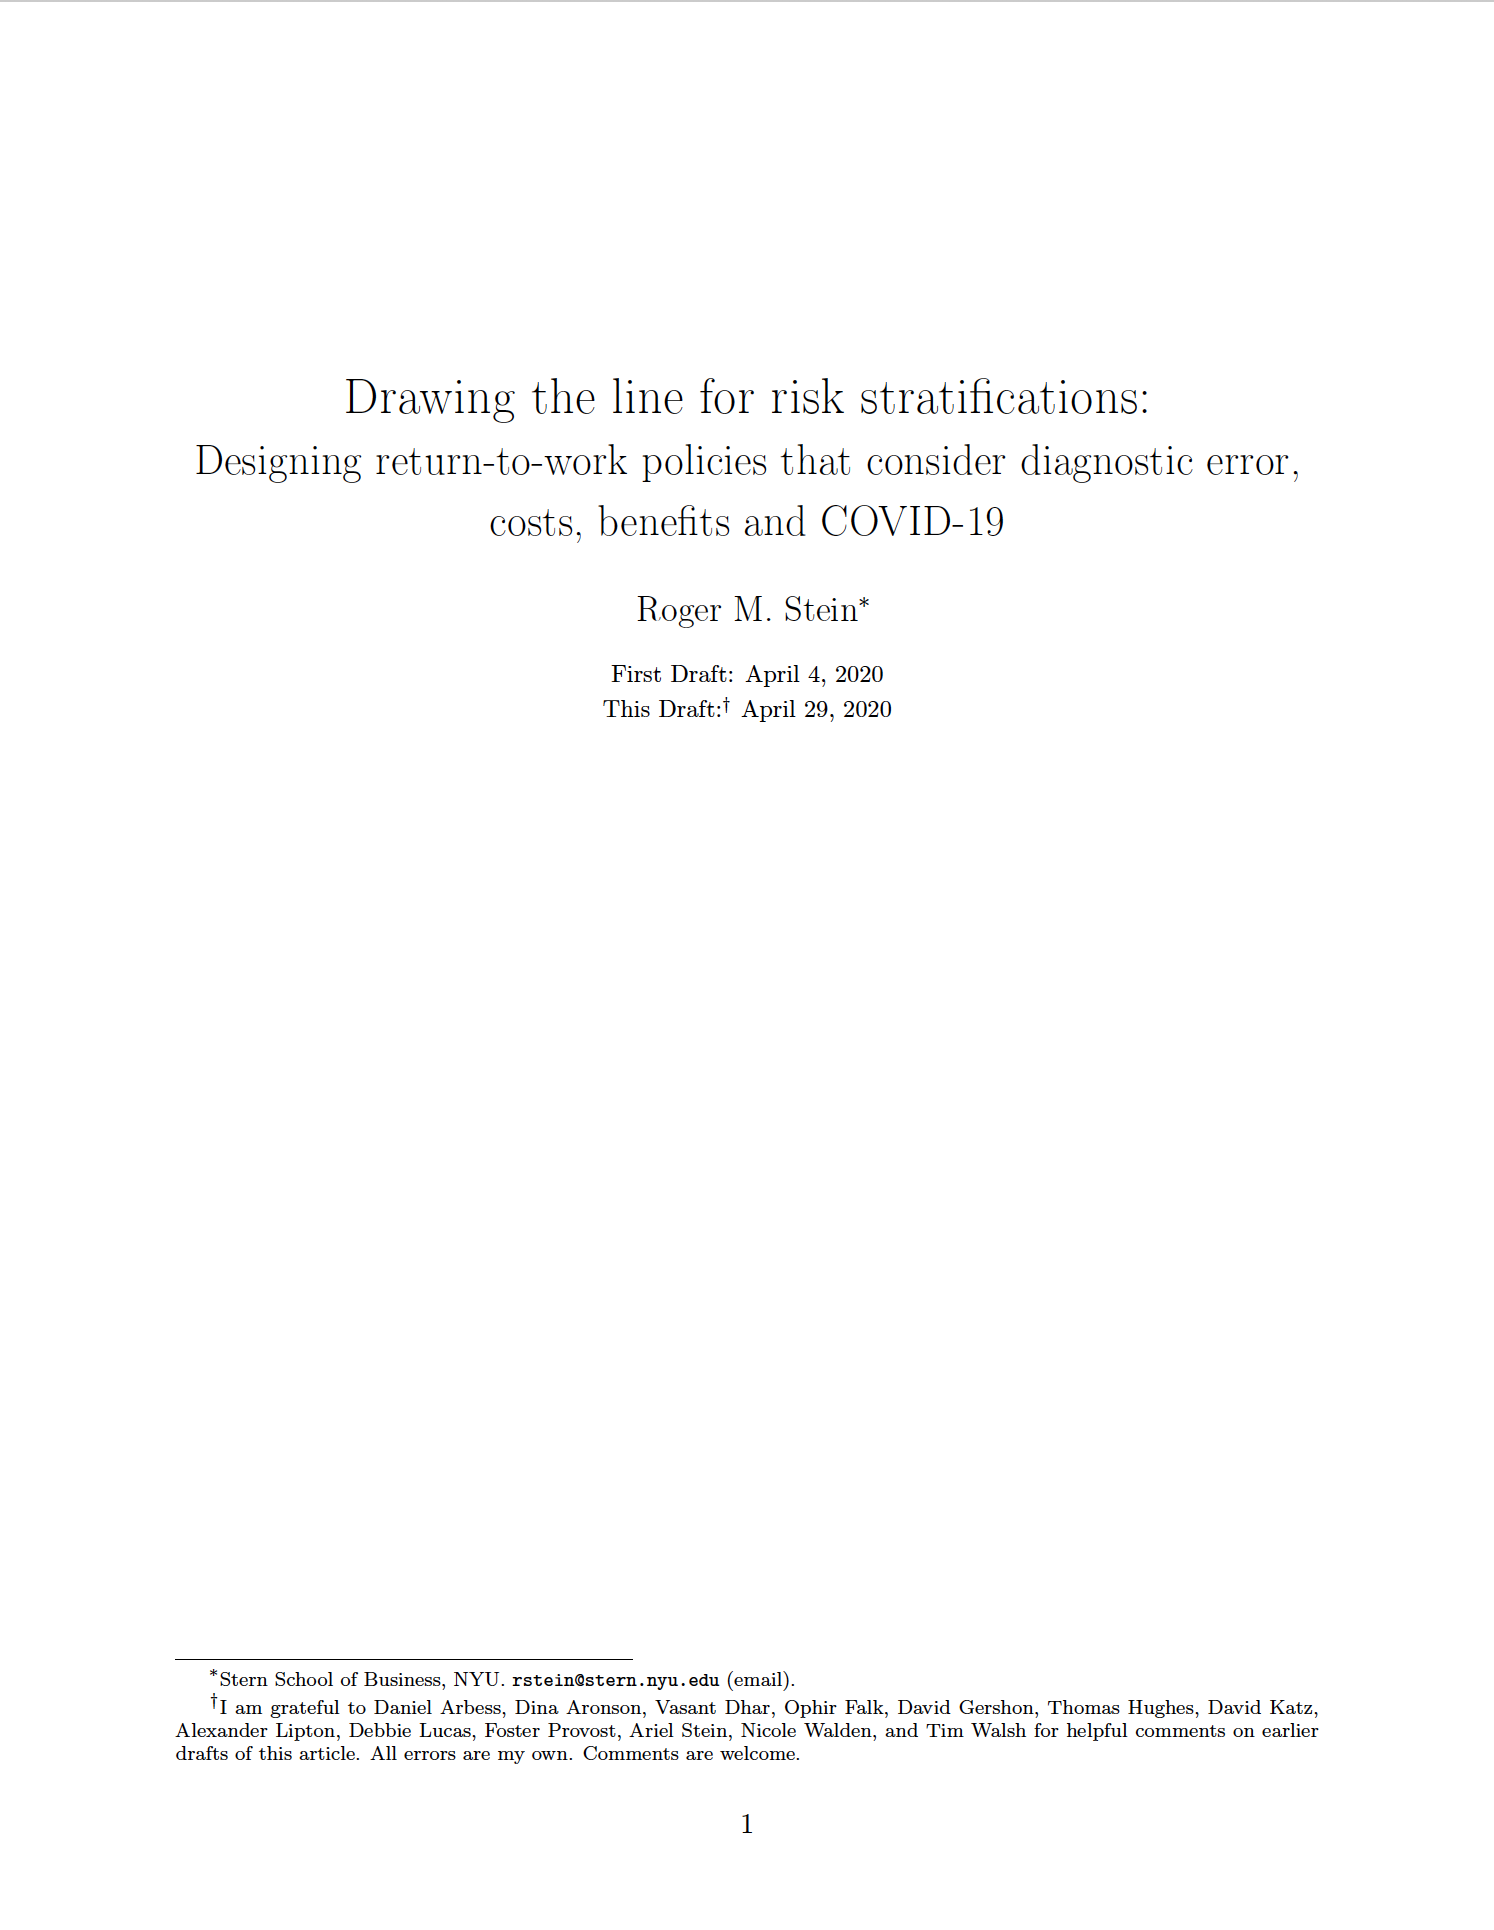 Drawing the line for risk stratifications - title image - Title page of white paper